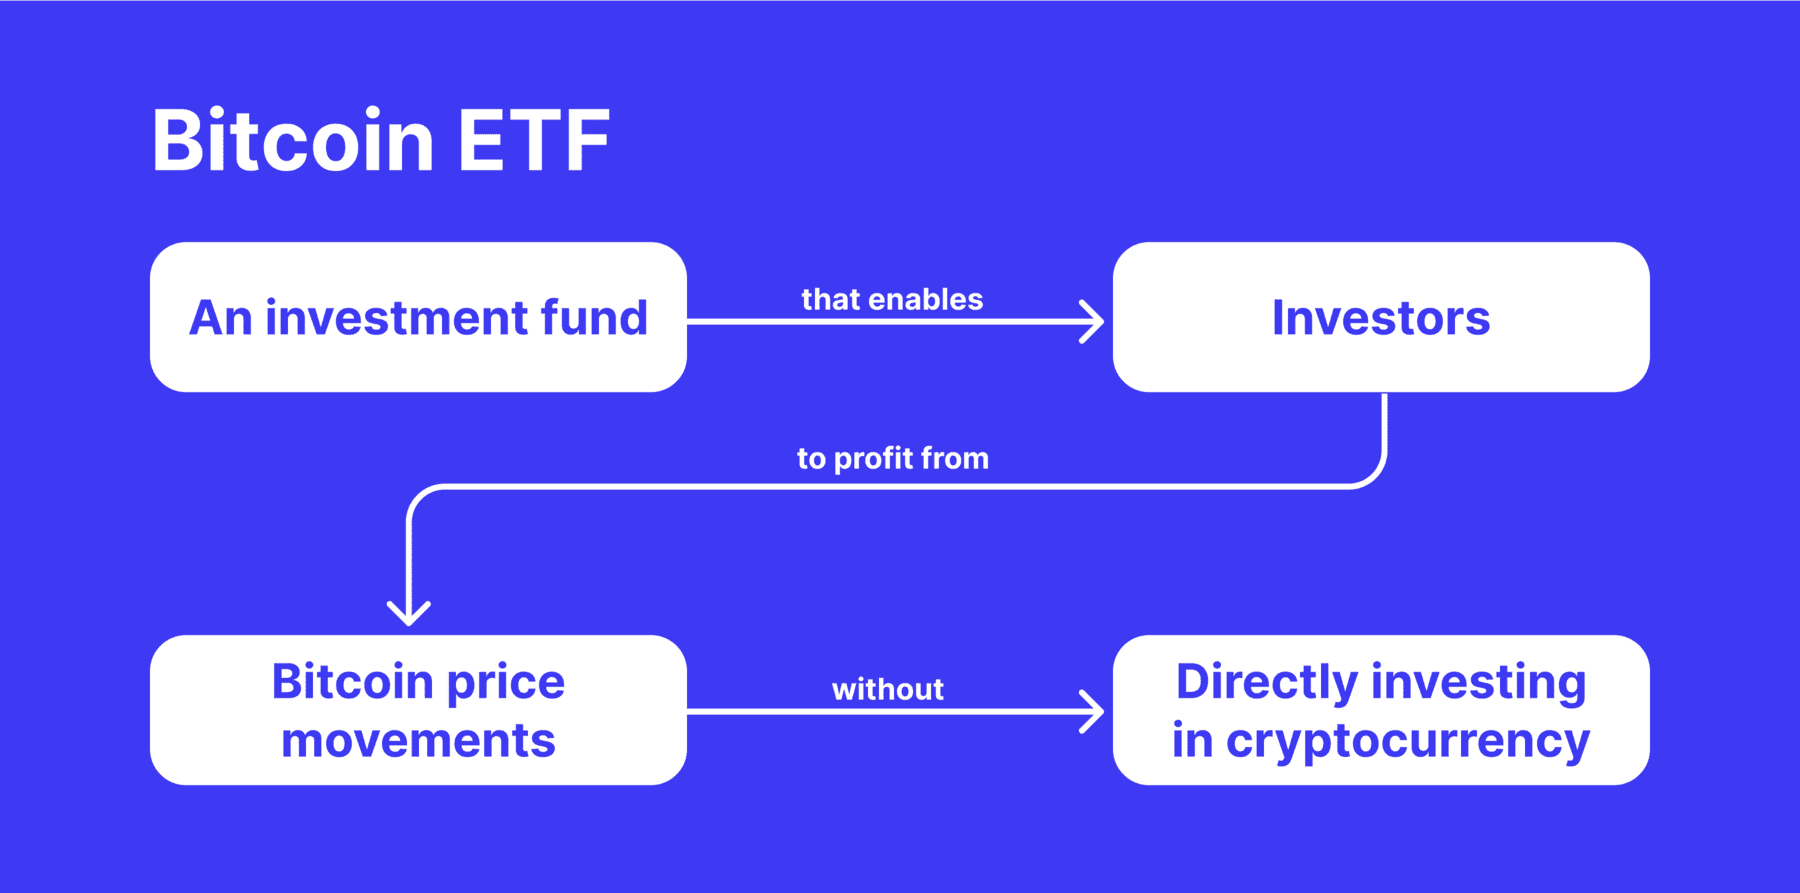 ETF vs ETP in Crypto: Differences and Advantages